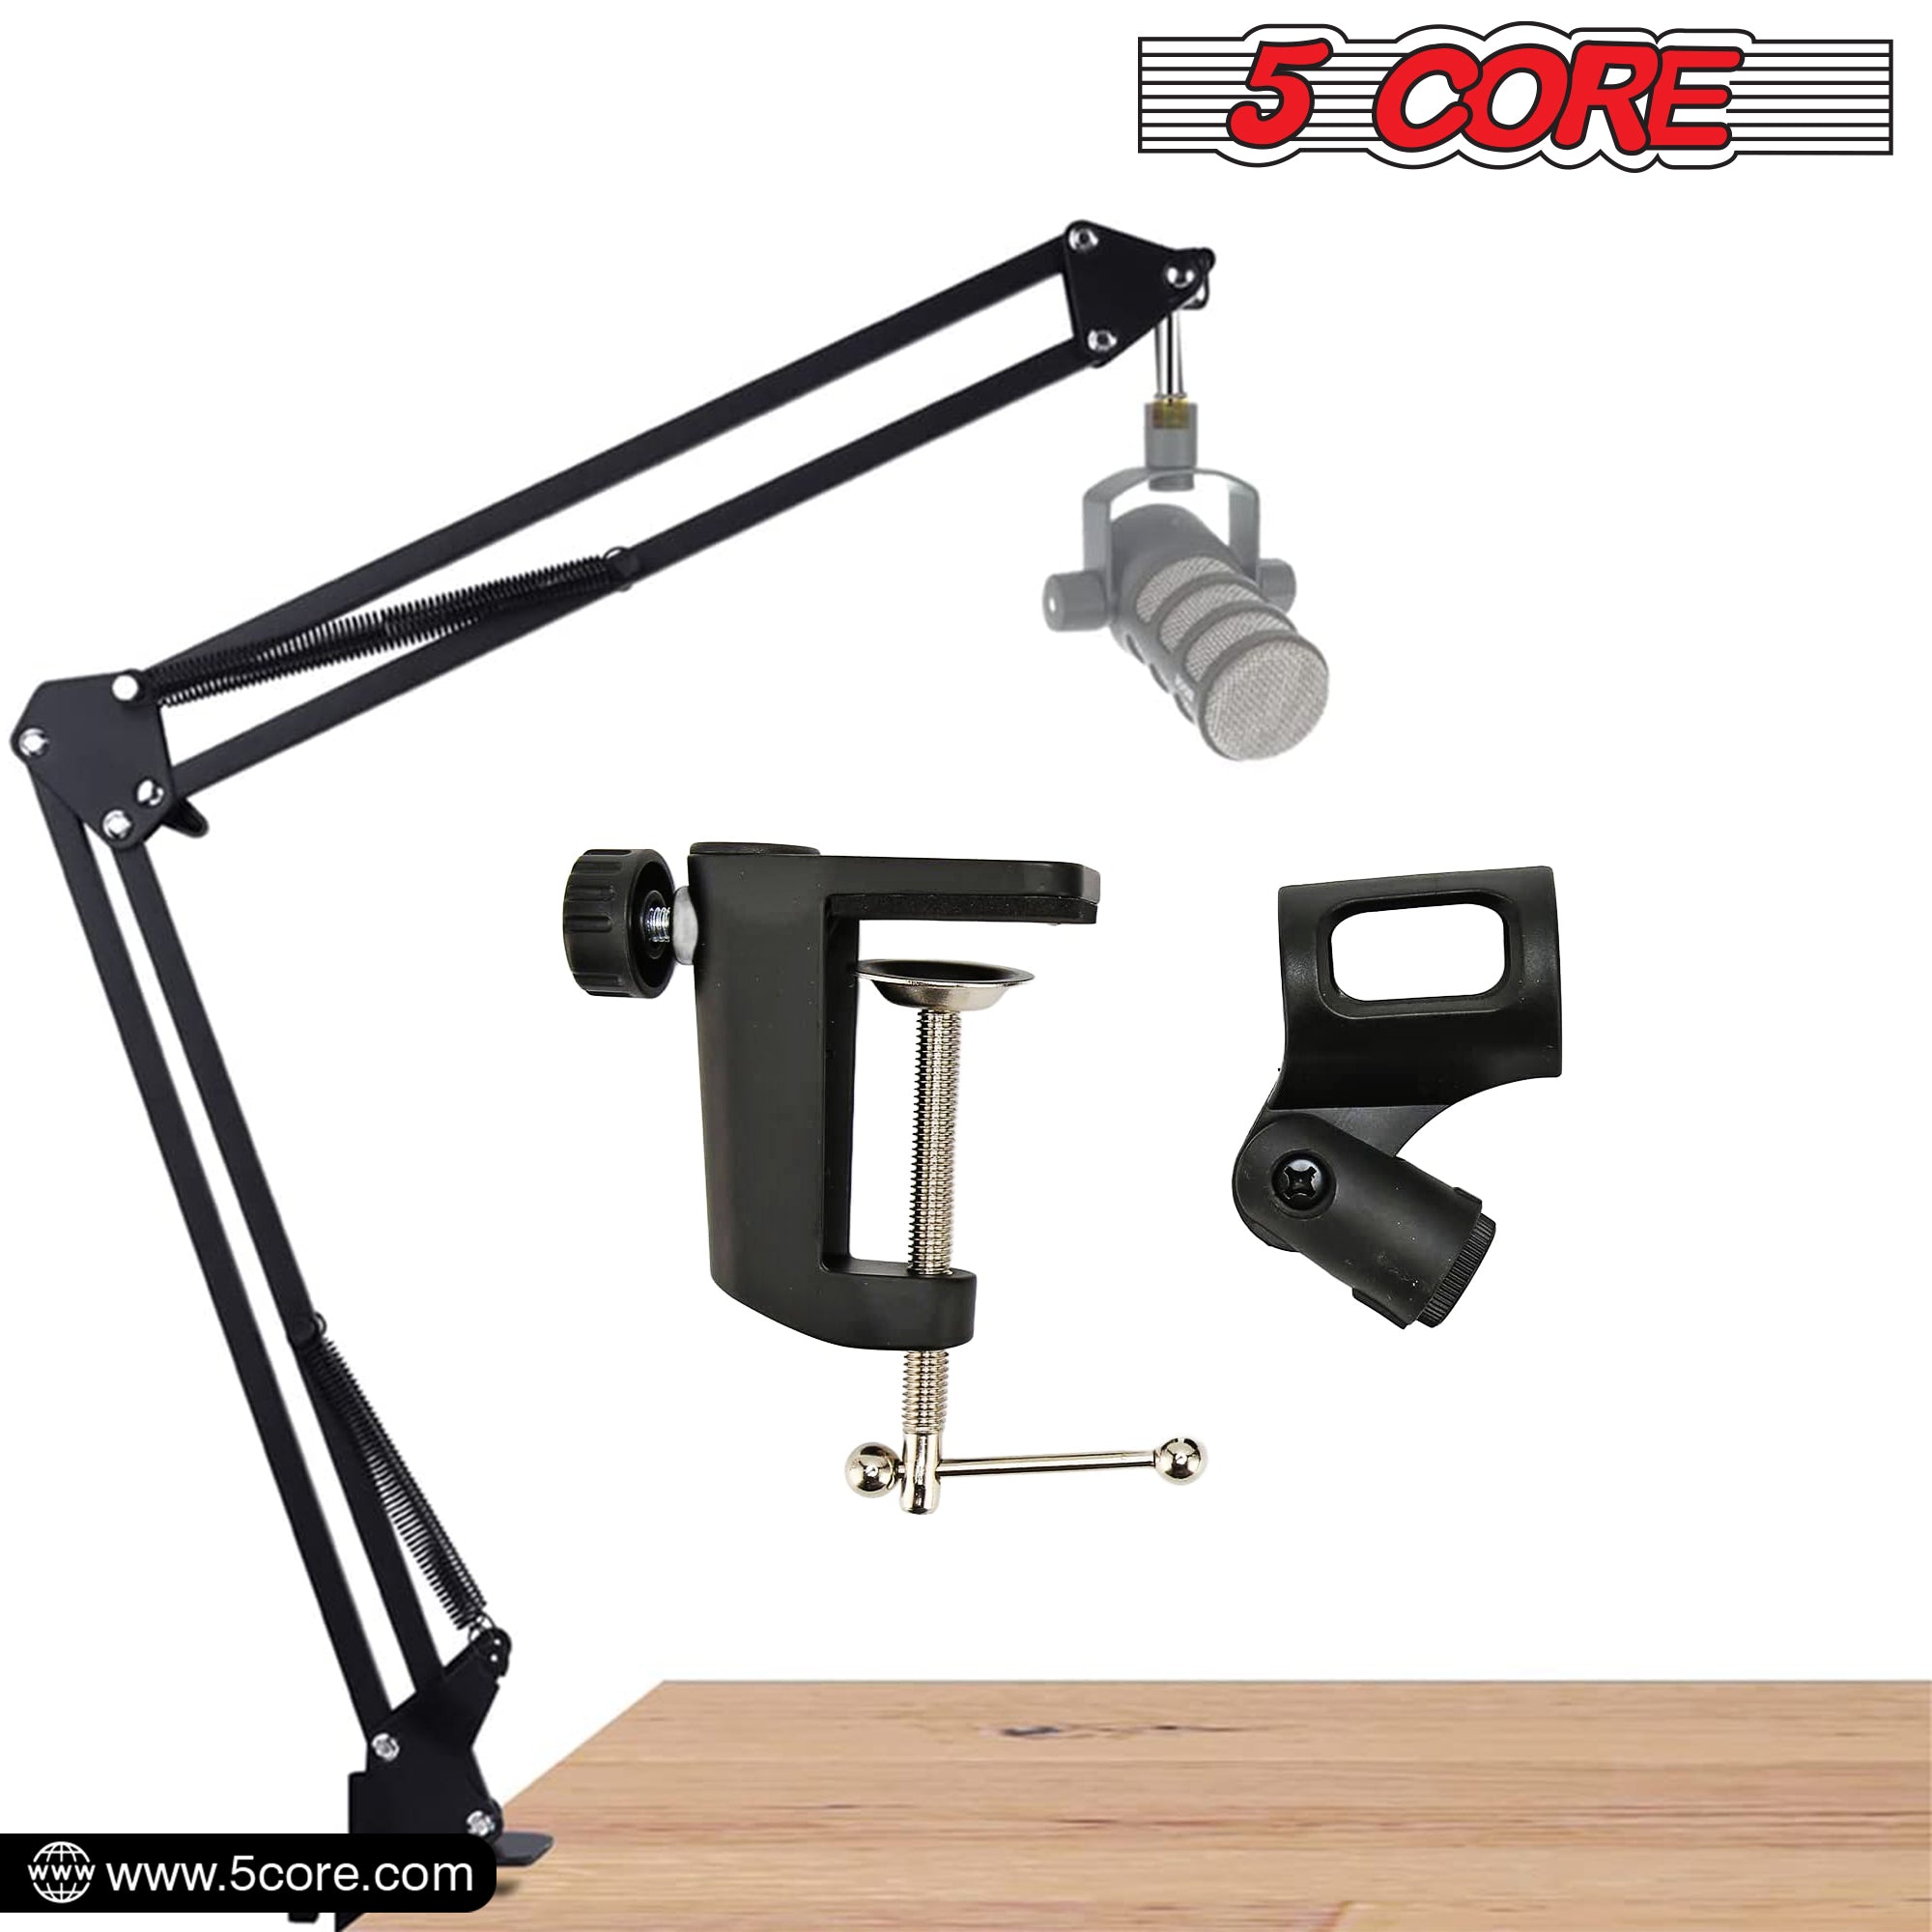 5 Core Microphone Arm Desk Mic Holder Stand Black Adjustable Microphone Arm Desk Mount 360° Rotatable And Foldable Scissor Mounting -MS ARM BLK